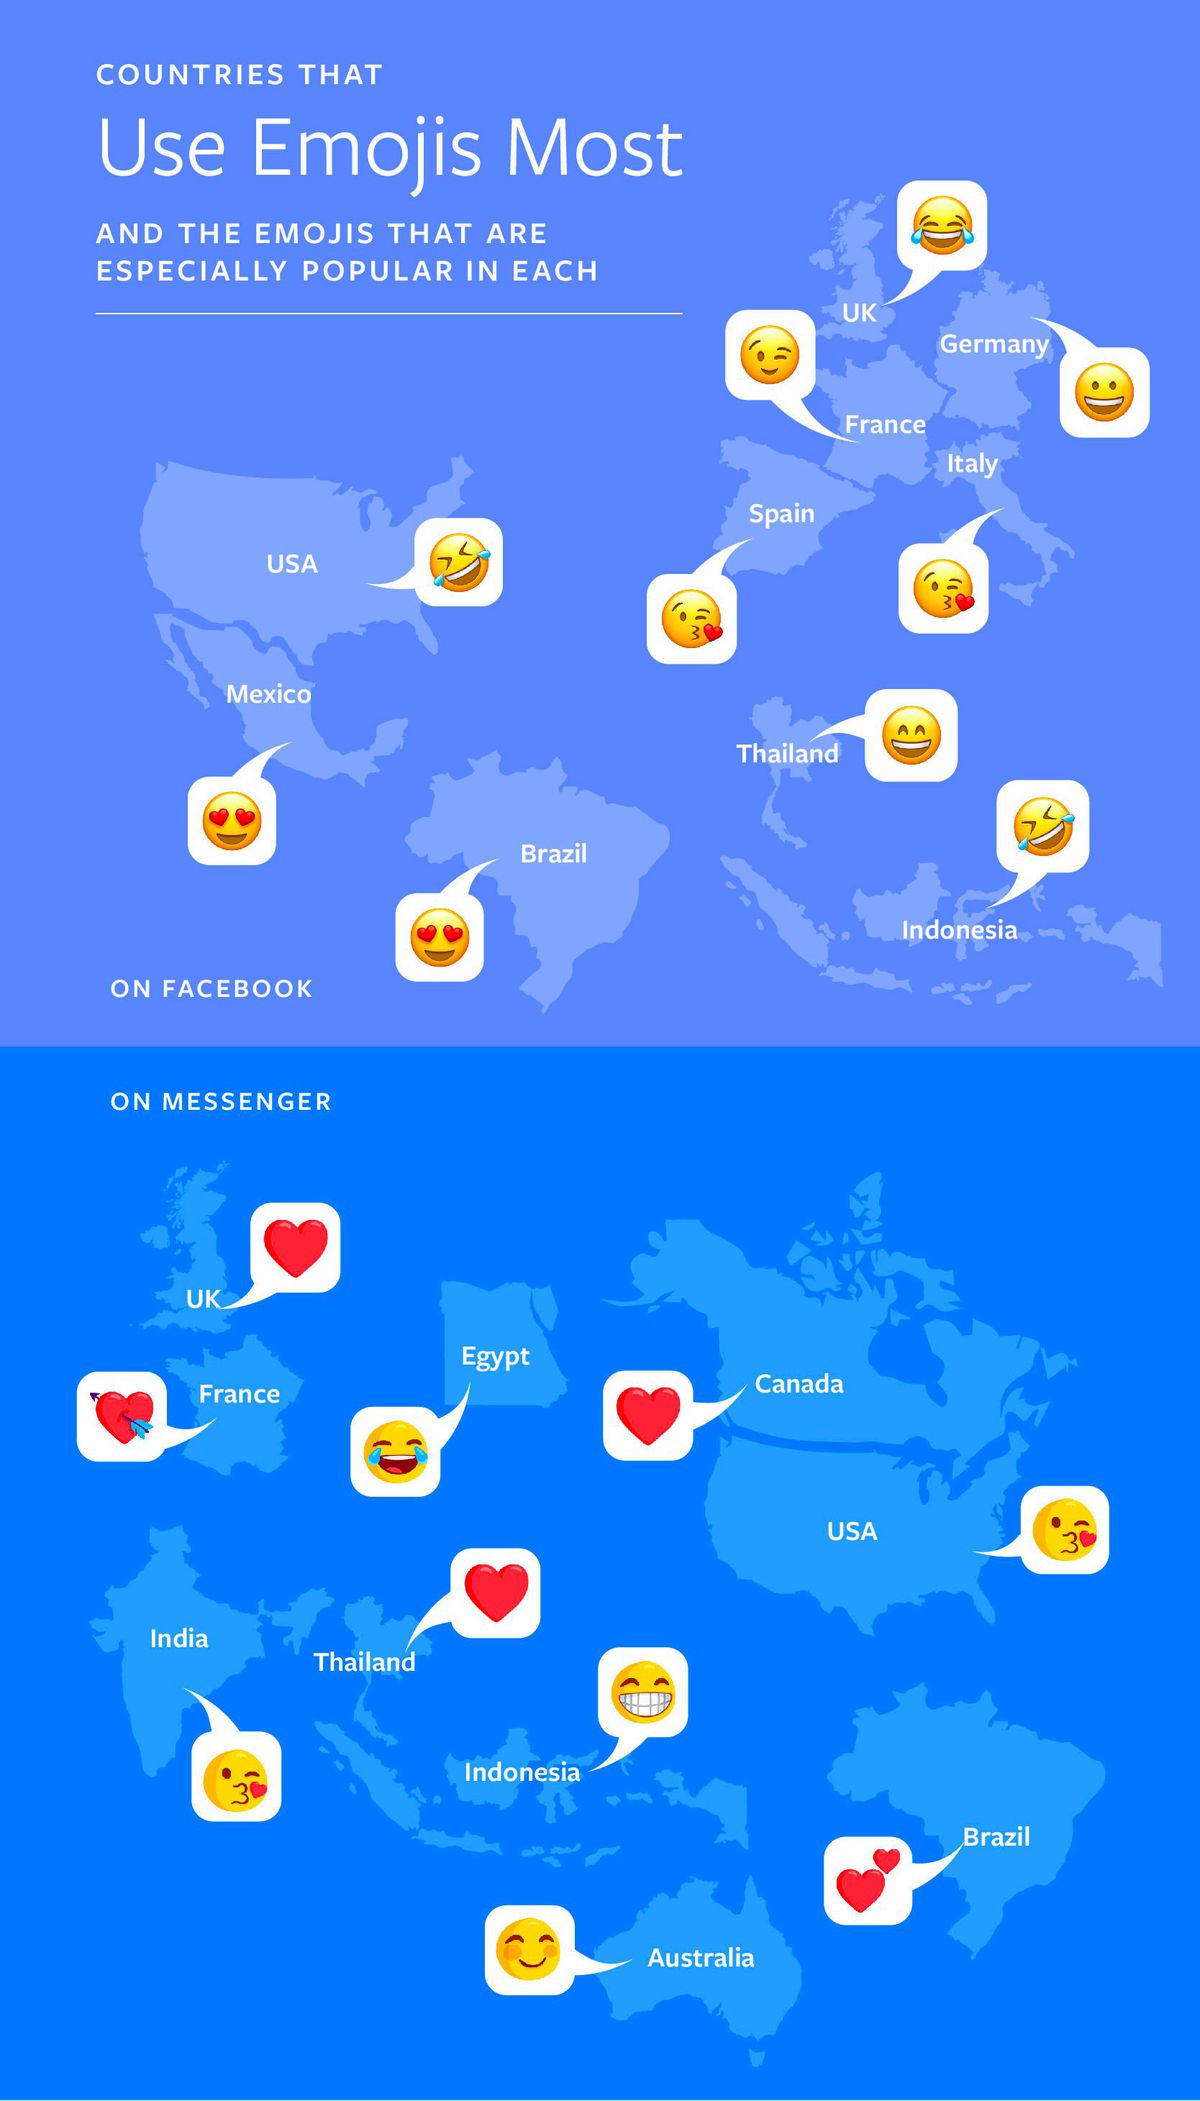 Facebook data how countries use emojis